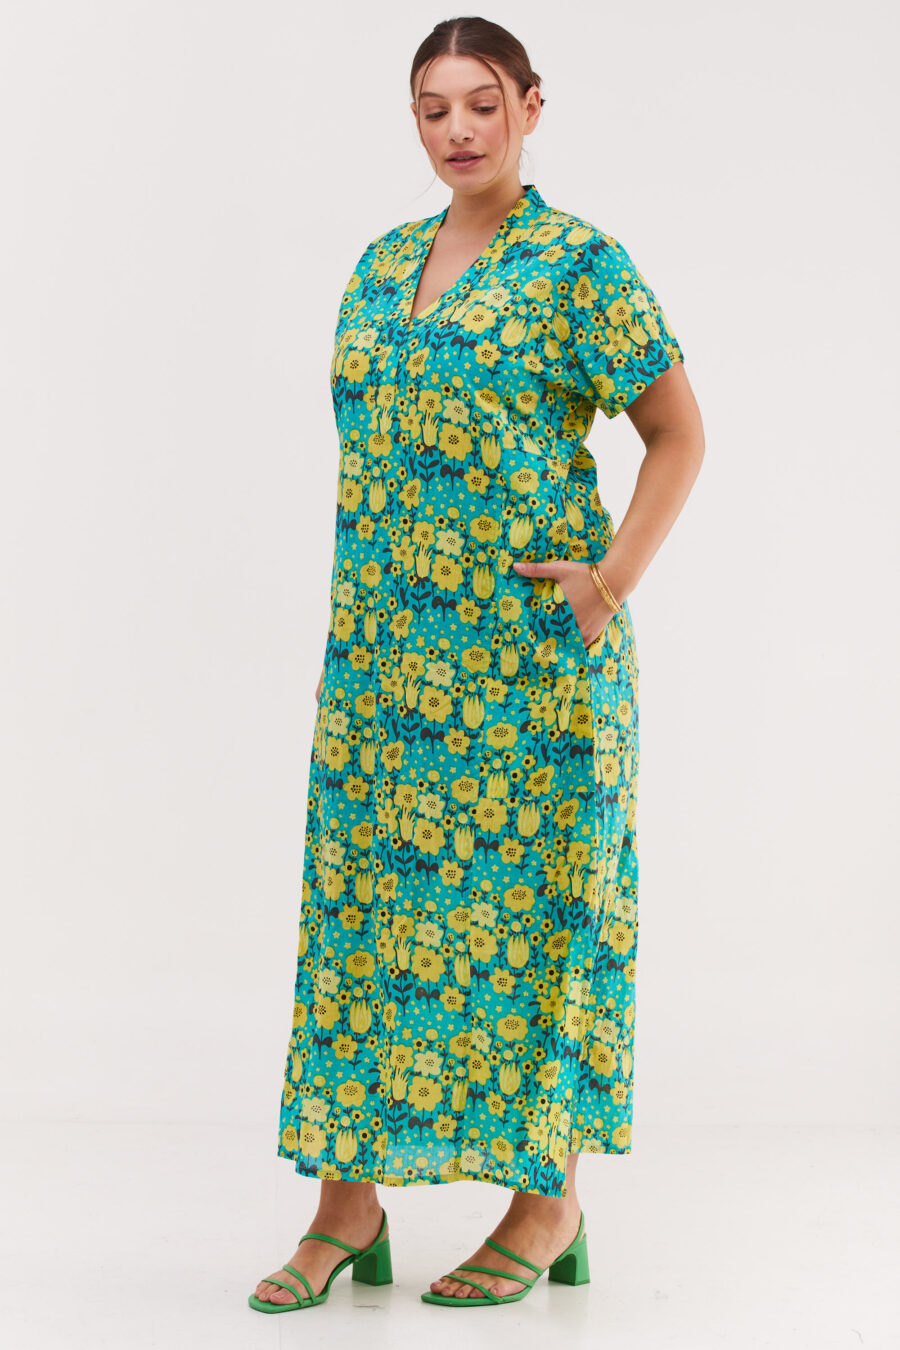 Jalabiya dress | Uniquely designed dress - Optimism print, tourquise dress with yellow flowers print by comfort zone boutique